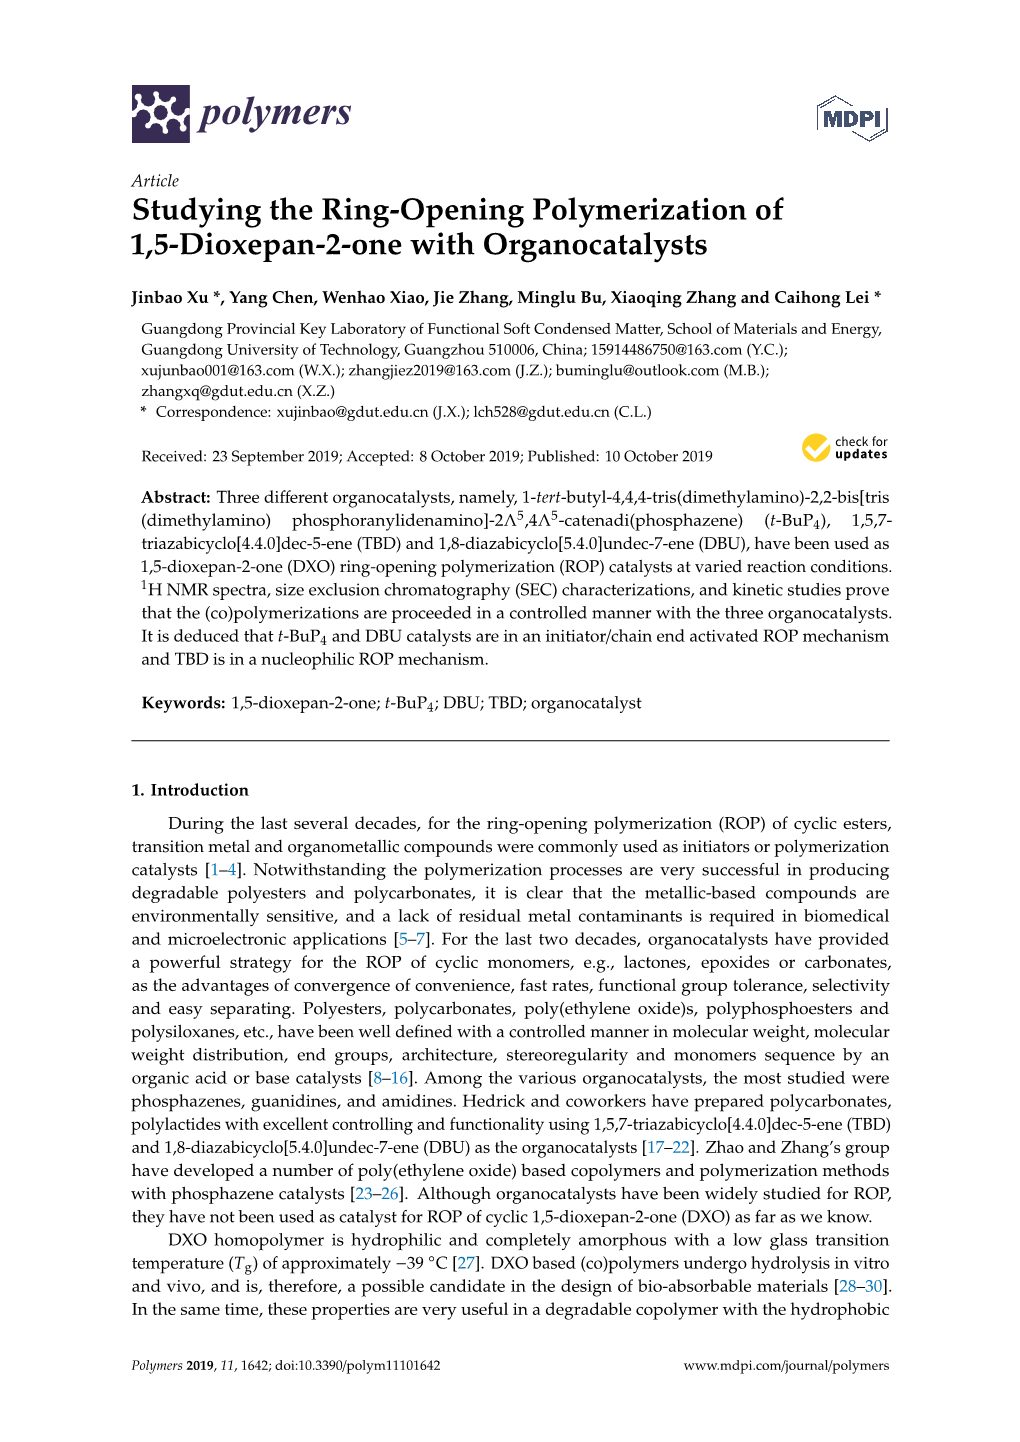 Studying the Ring-Opening Polymerization of 1,5-Dioxepan-2-One with Organocatalysts